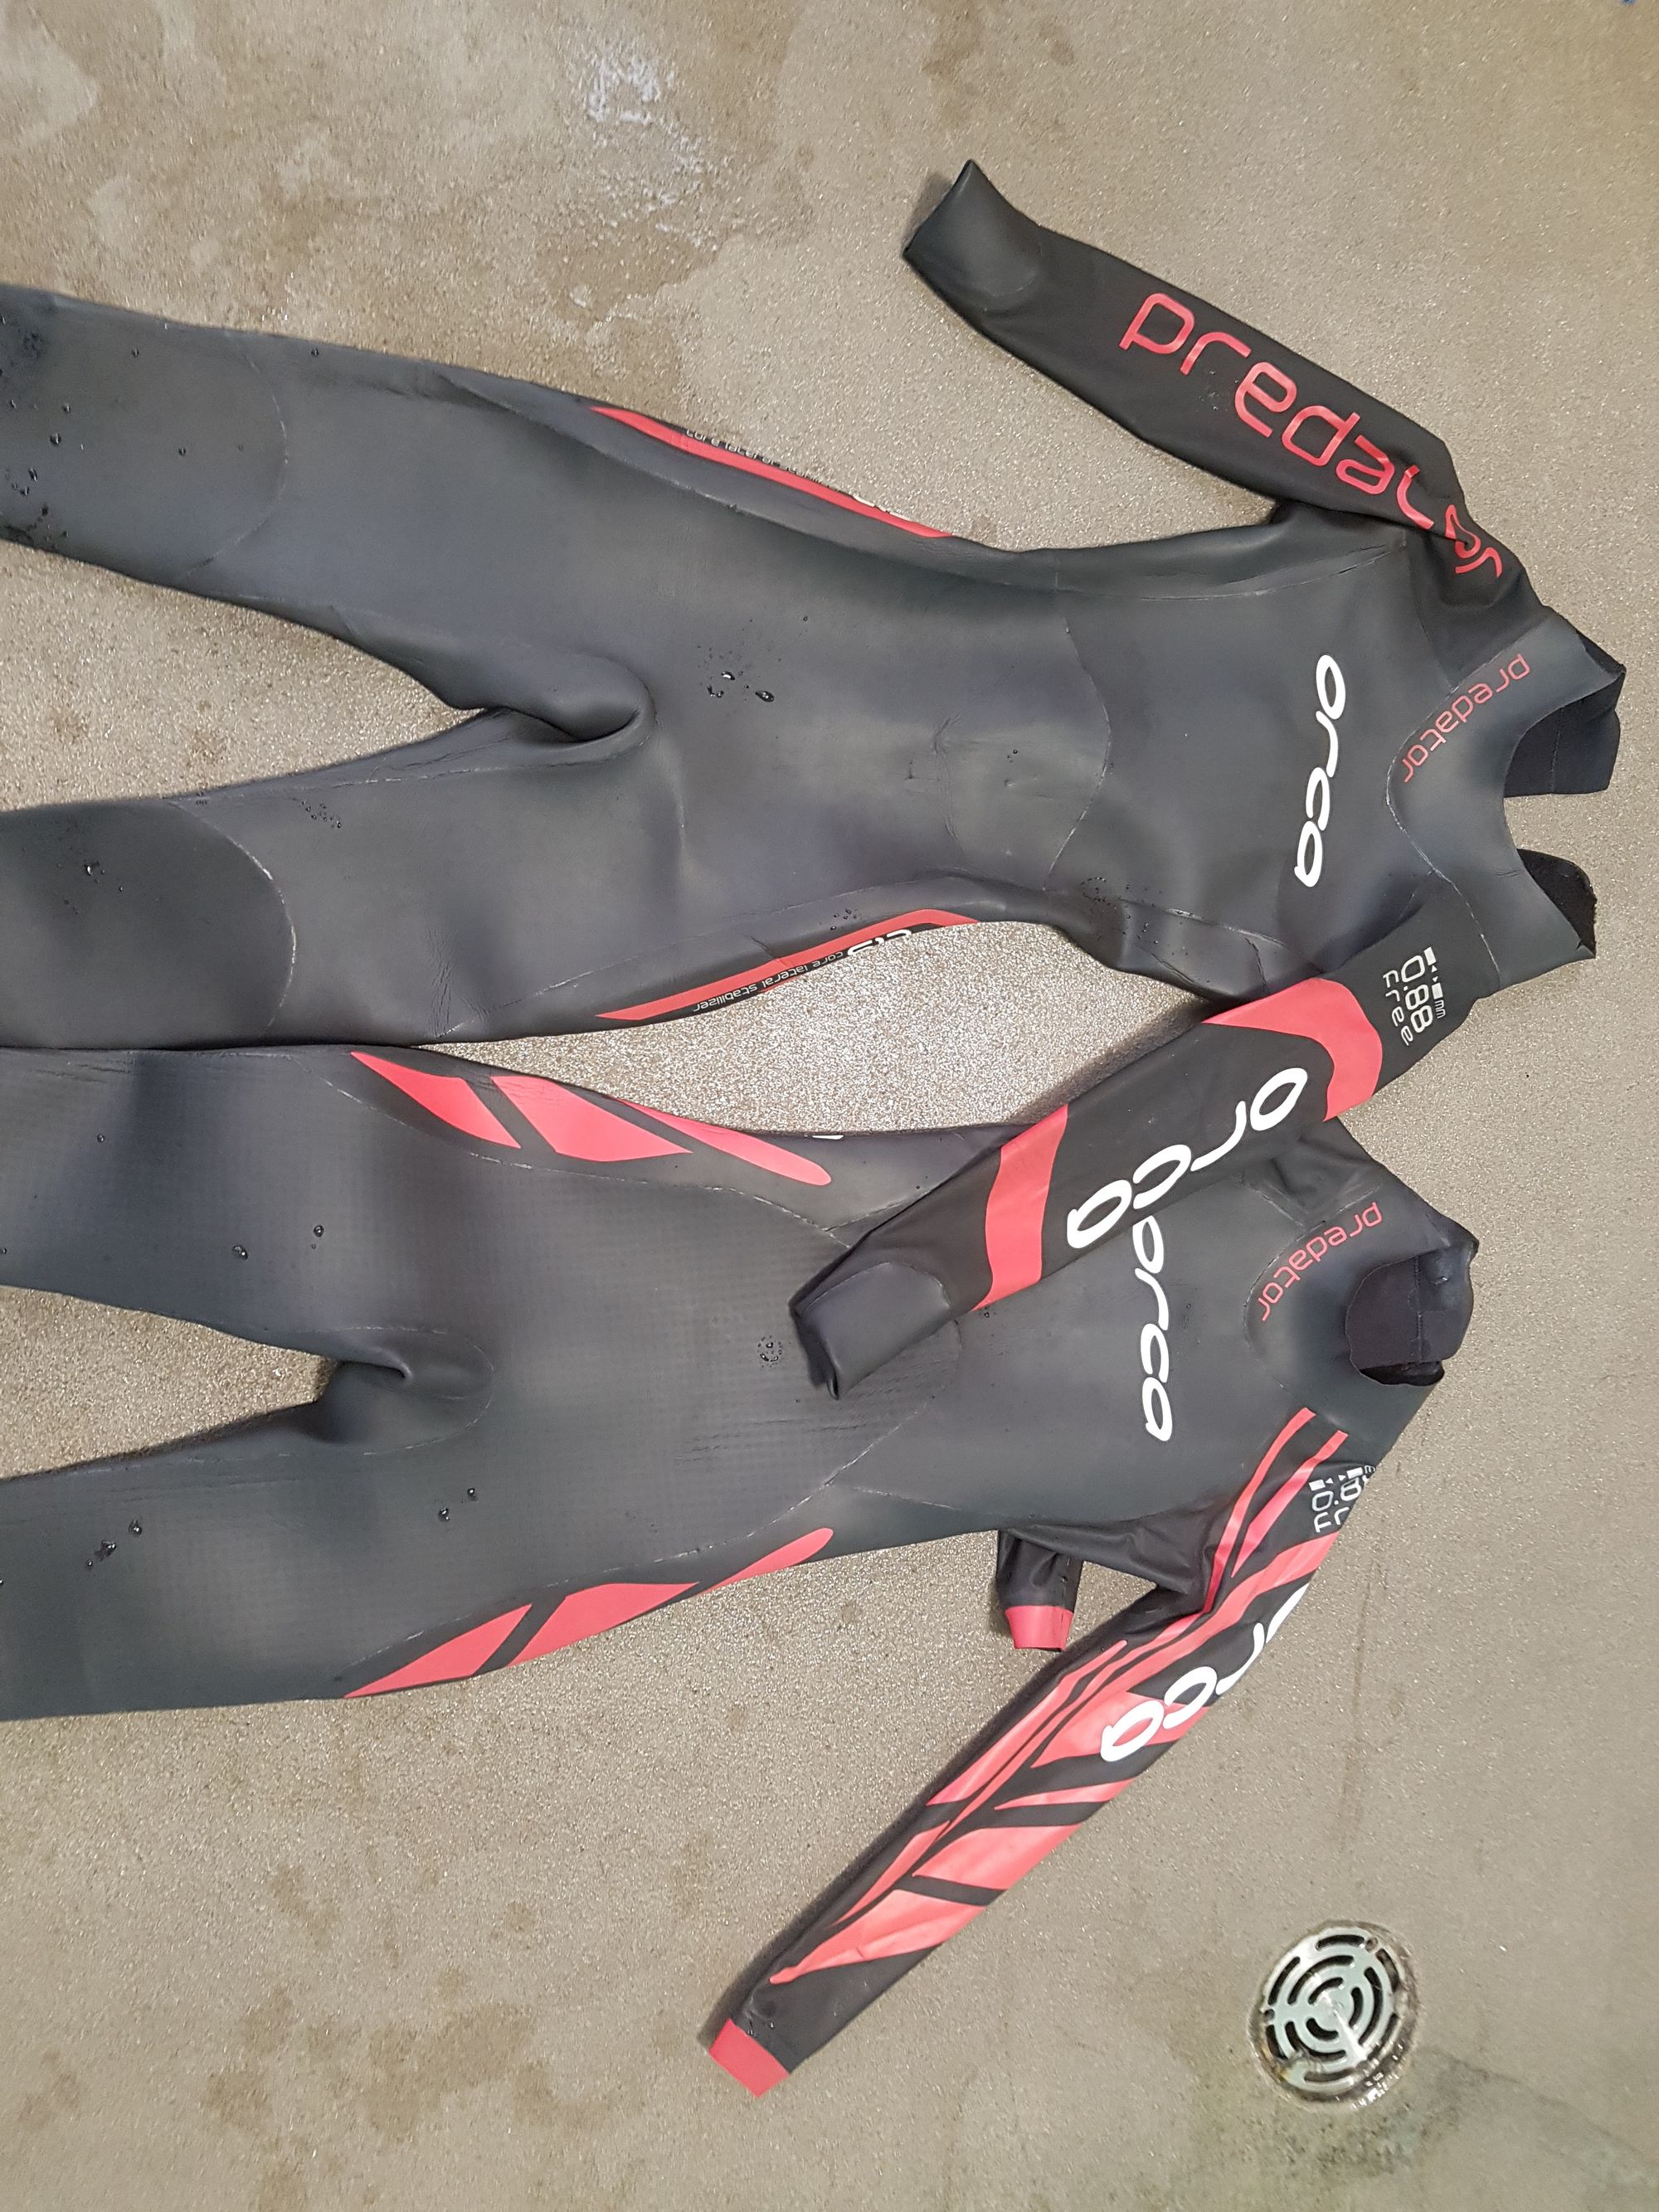 Image of the the improved Orca Predator wetsuit